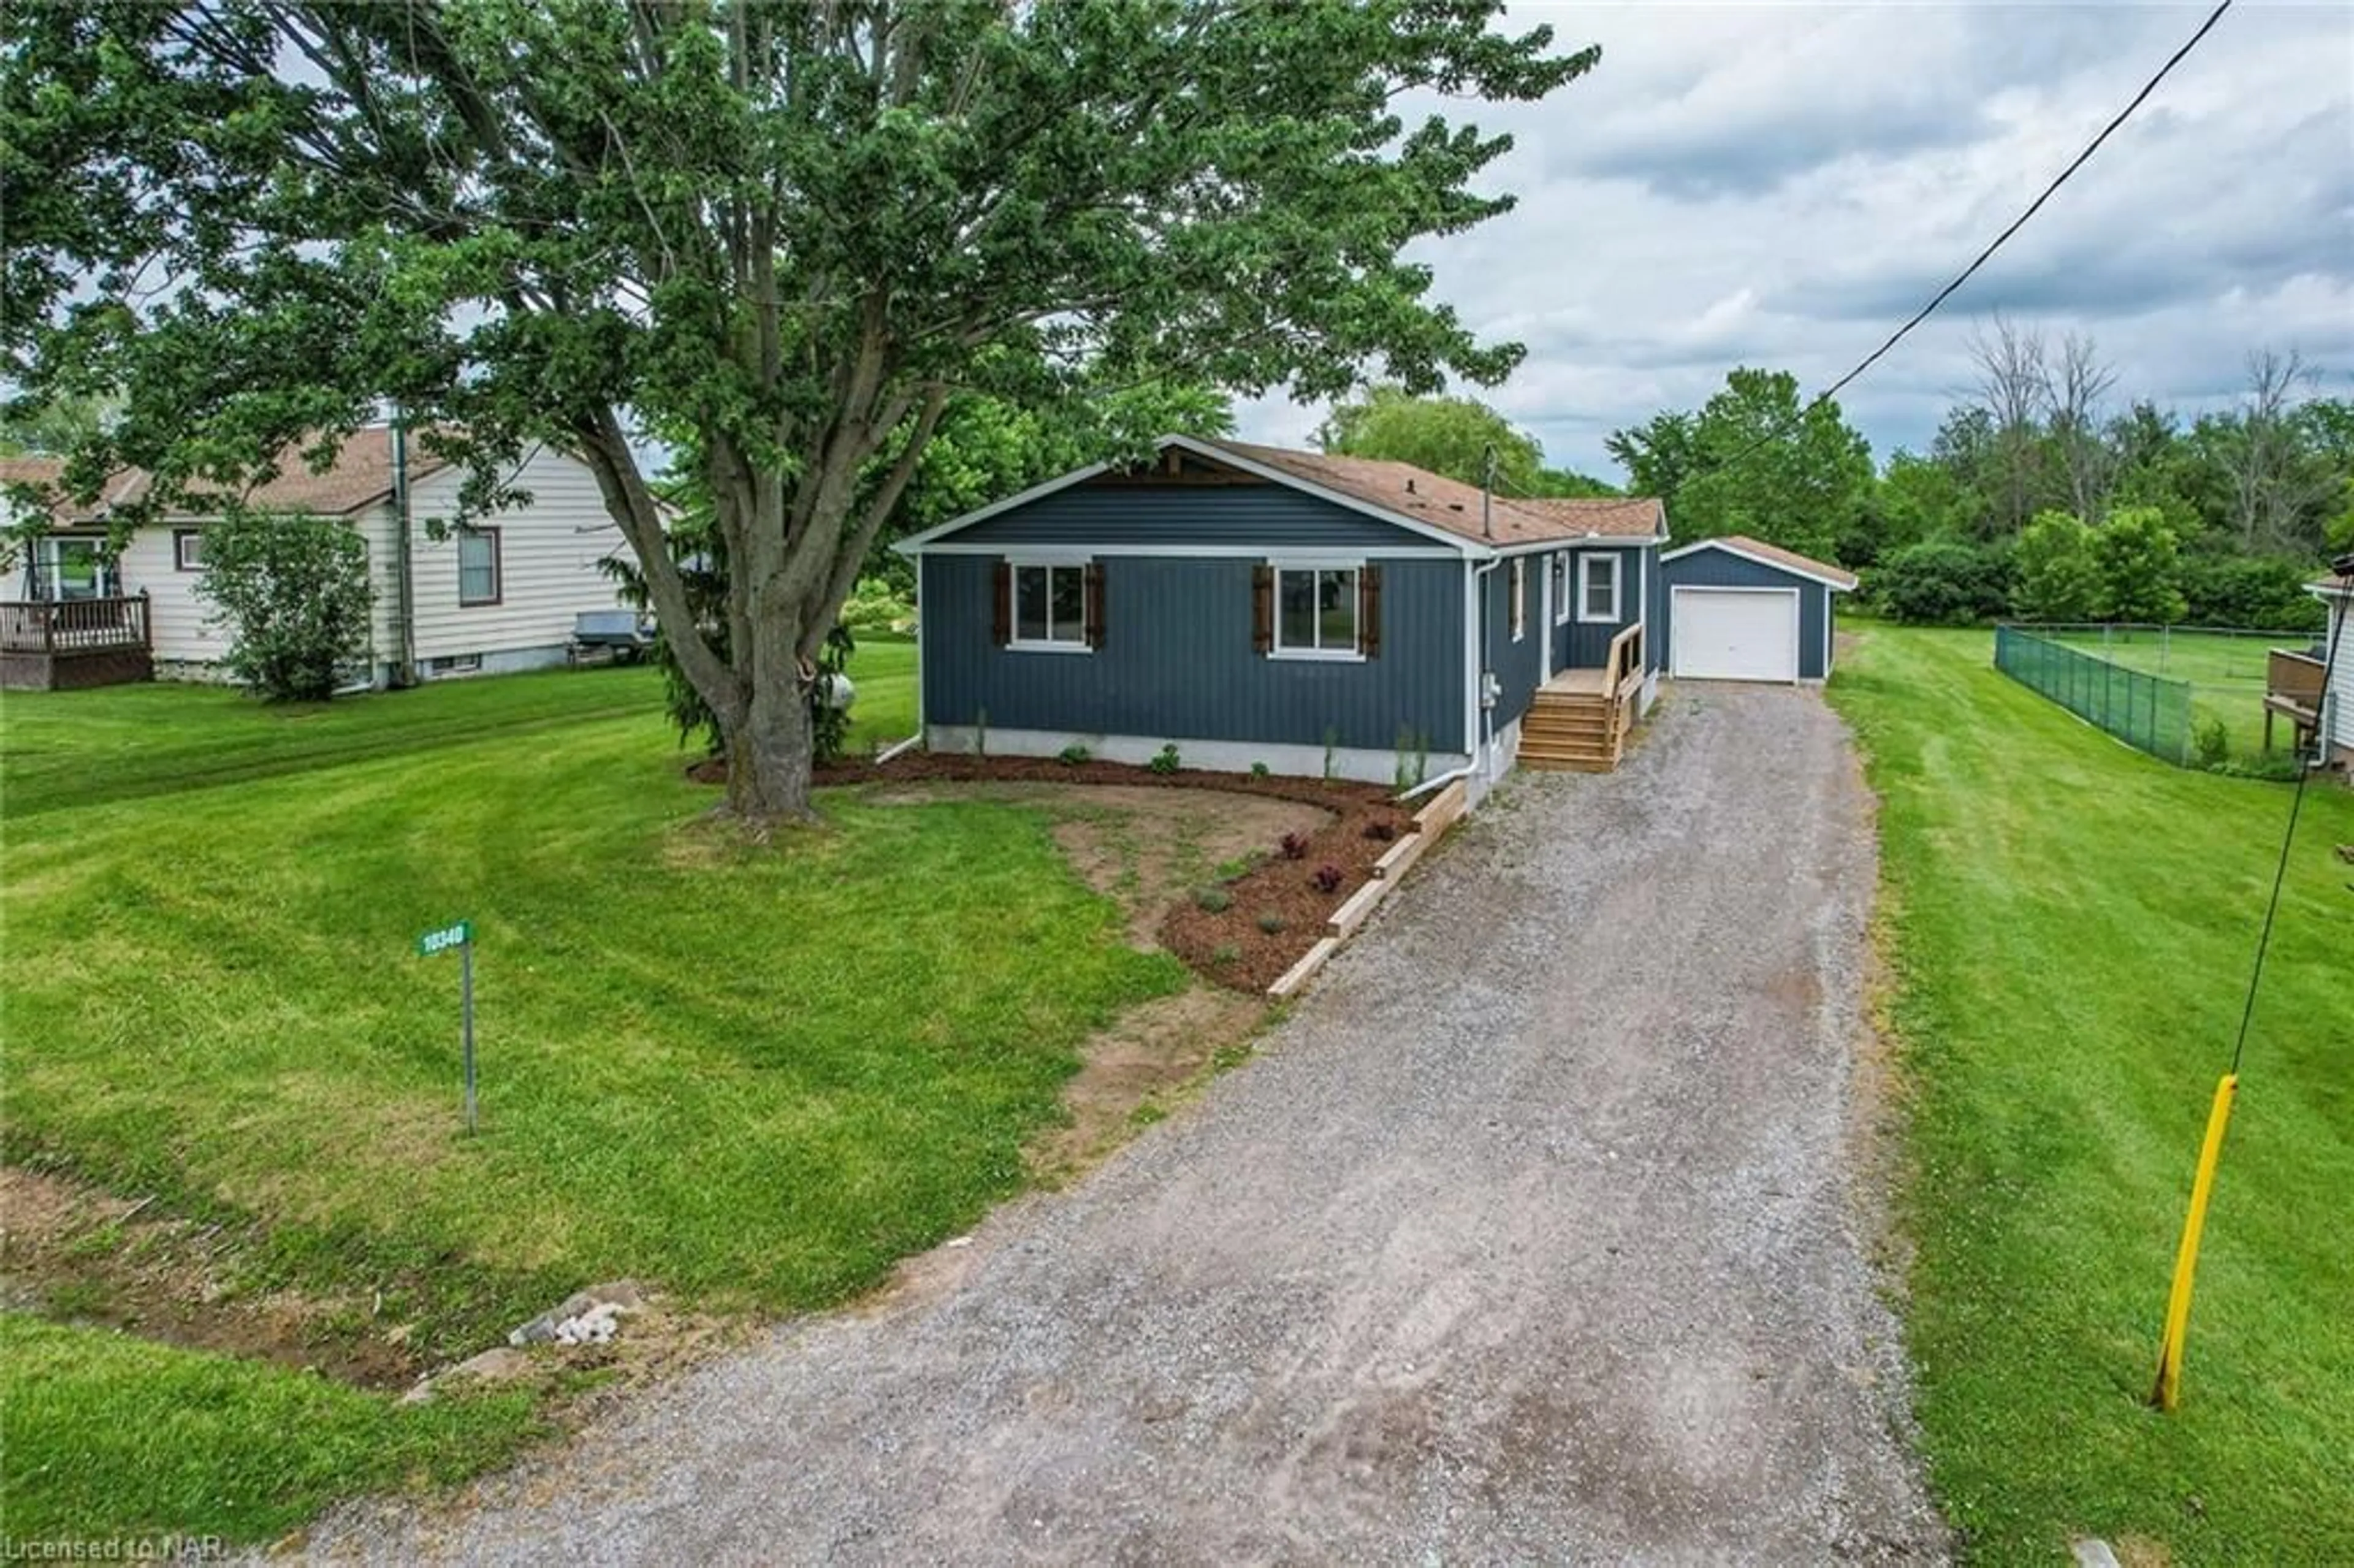 Cottage for 10340 Willodell Rd, Niagara Falls Ontario L0S 1K0